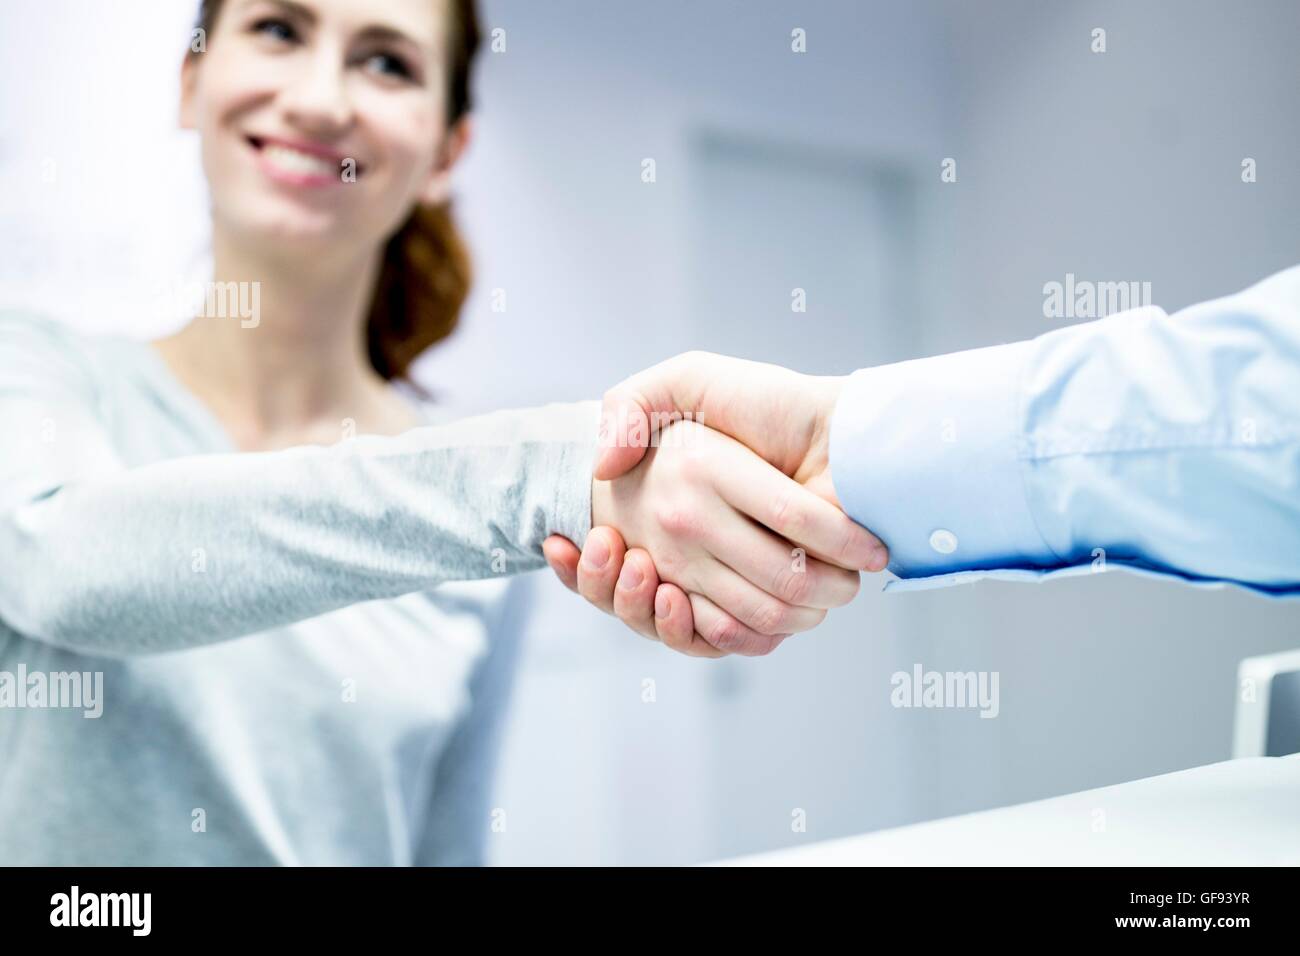 MODEL RELEASED. Dentist shaking hands with patient in clinic. Stock Photo